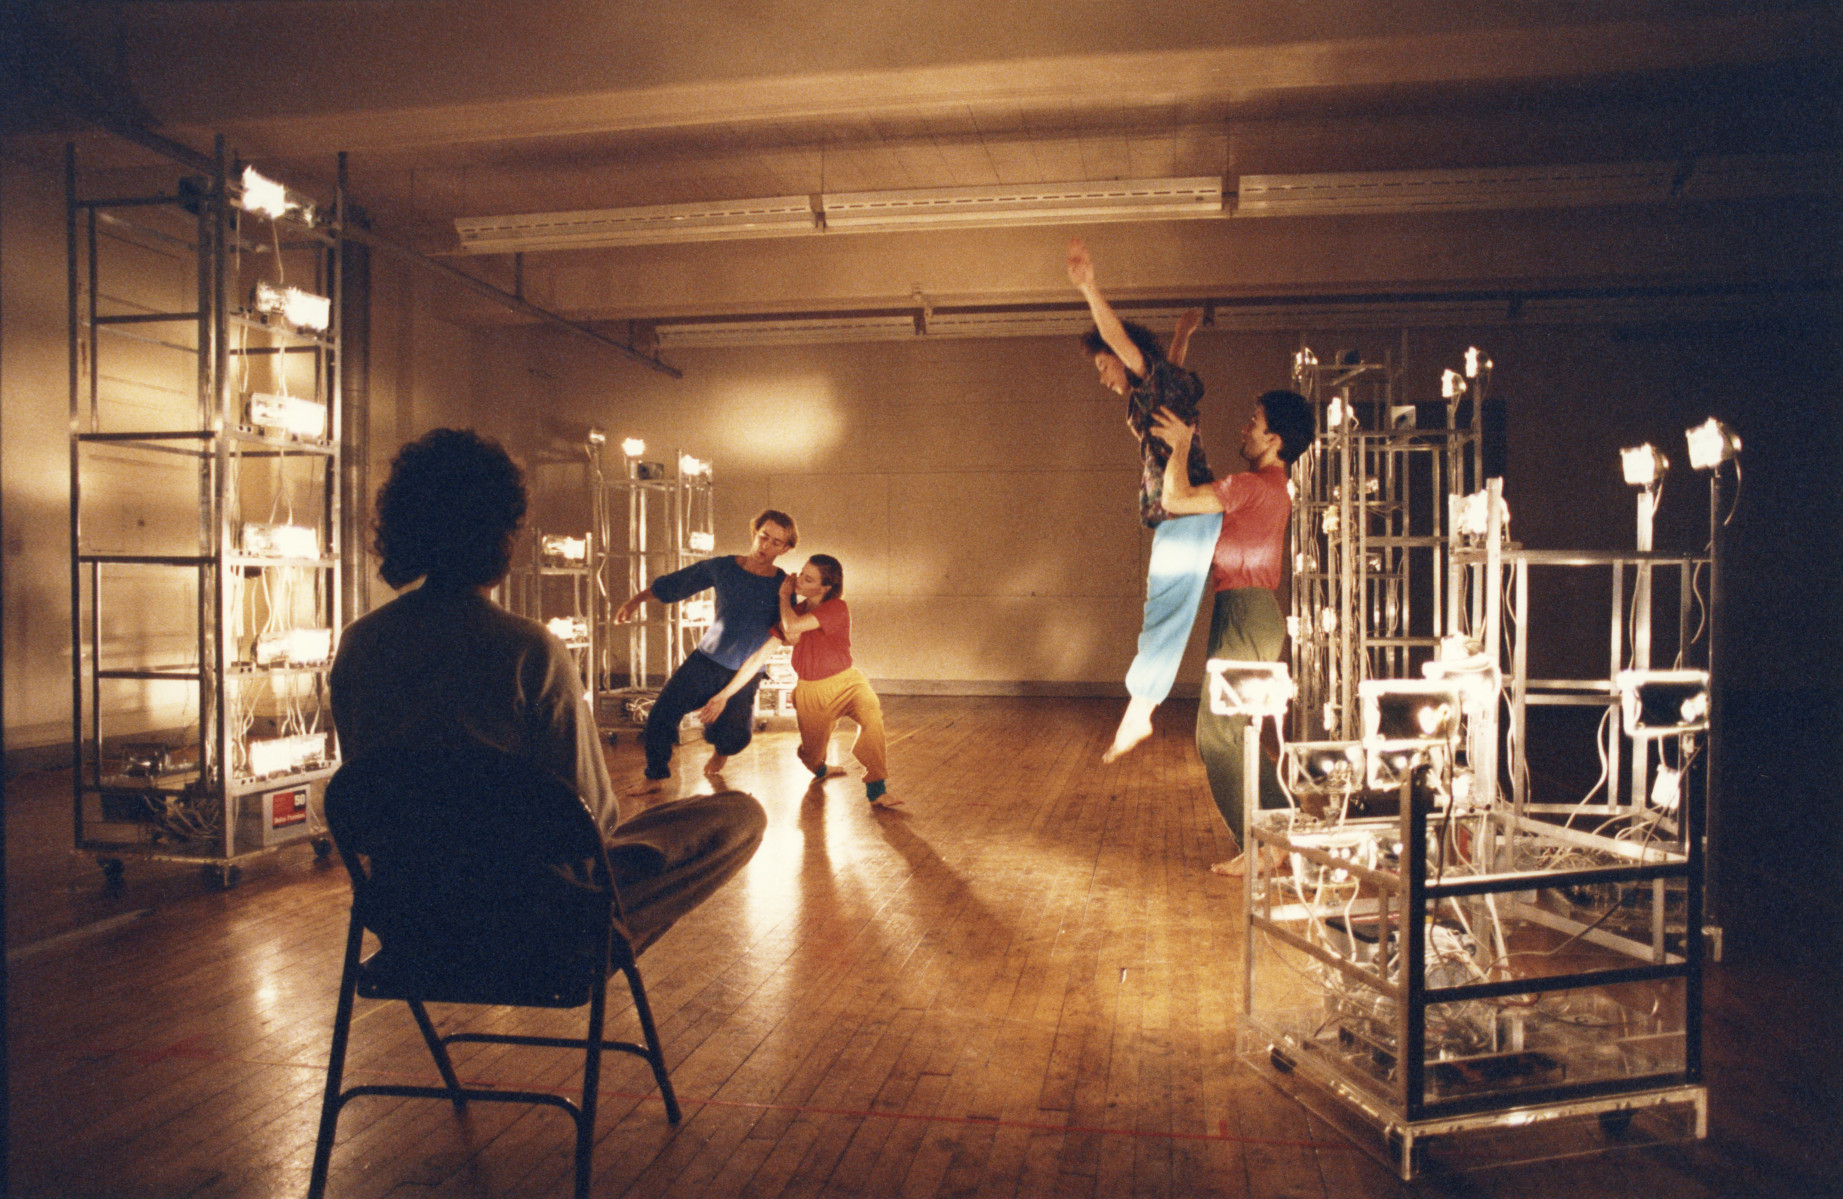 Trisha Brown rehearsing multimedia piece, Soho, New York : The Arts : Photography by Adam Stoltman: Sports Photography, The Arts, Portraiture, Travel, Photojournalism and Fine Art in New York